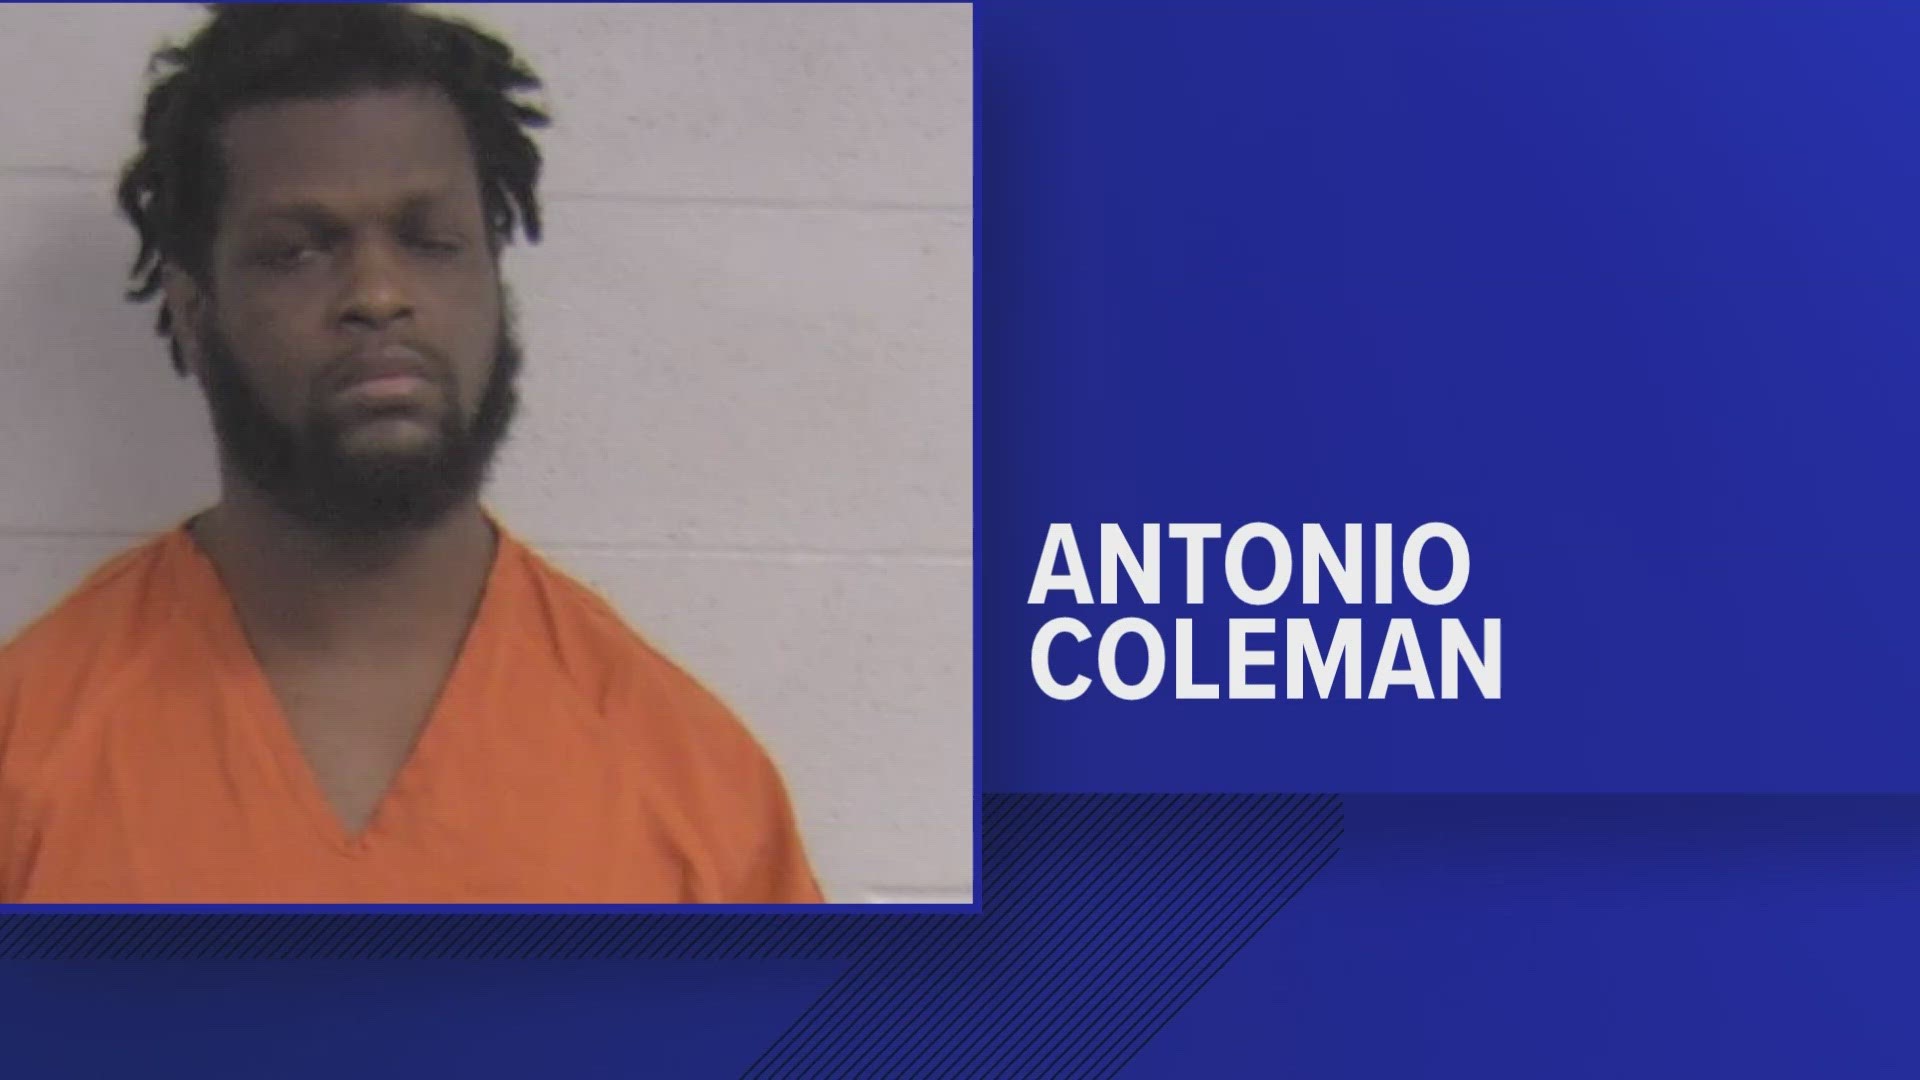 Antonio Coleman was arrested Friday after a caller reported he was exposing himself near 1st and Broadway, police said.